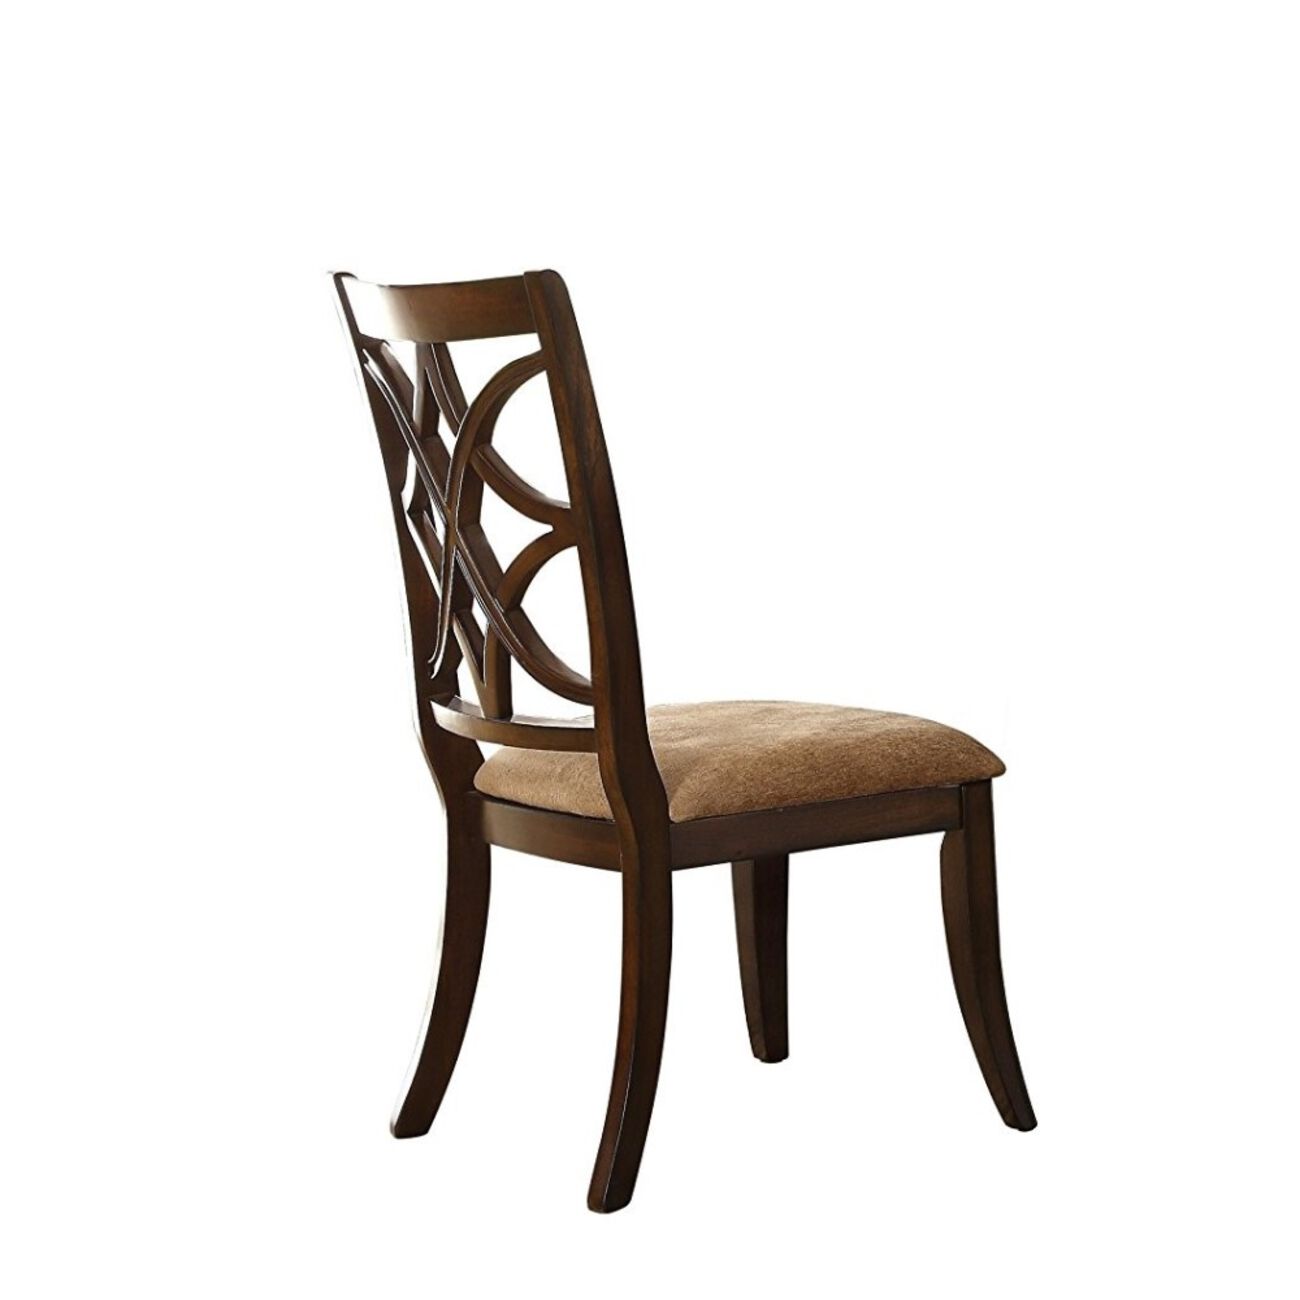 Solid Wooden Side Chair With Beige Fabric Seat, Cherry Brown & Beige (Set Of 2)